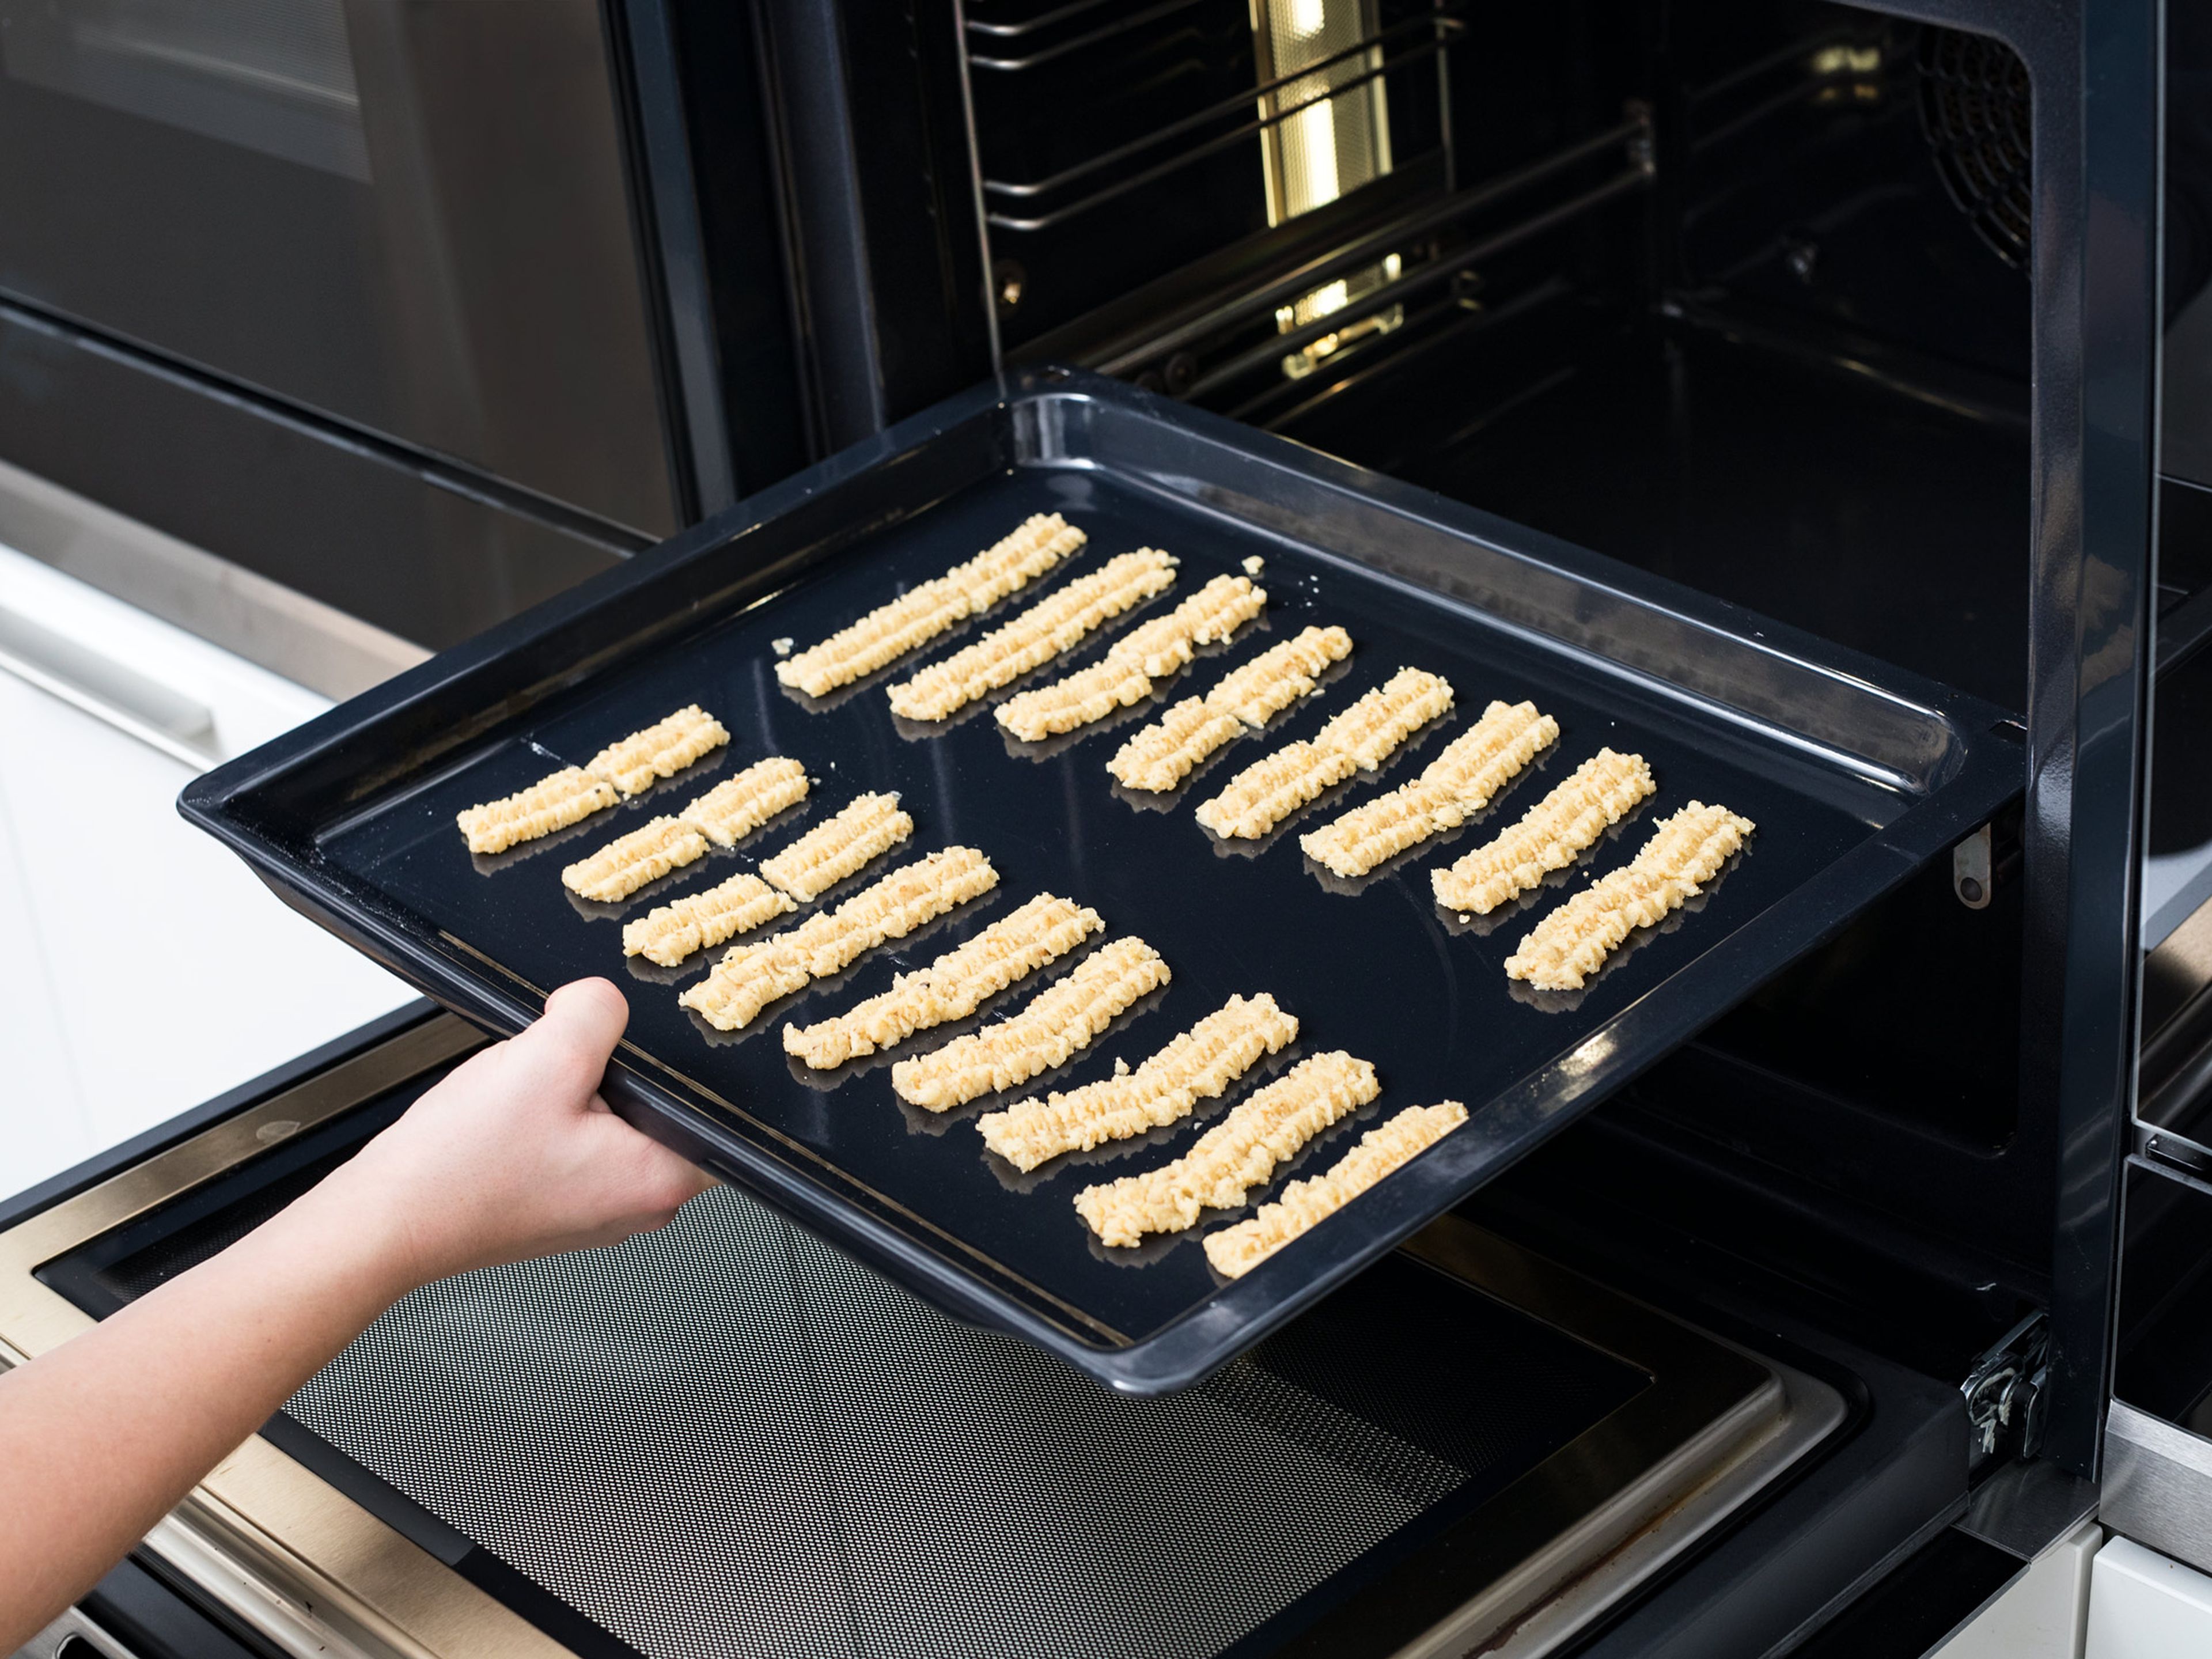 Transfer cookies to a baking sheet, leaving at least 1-cm/0.4-in. space between each cookie. Cut to size if needed. Transfer to oven and bake at 180°C/350°F for approx. 12 – 15 min. then let cool completely.